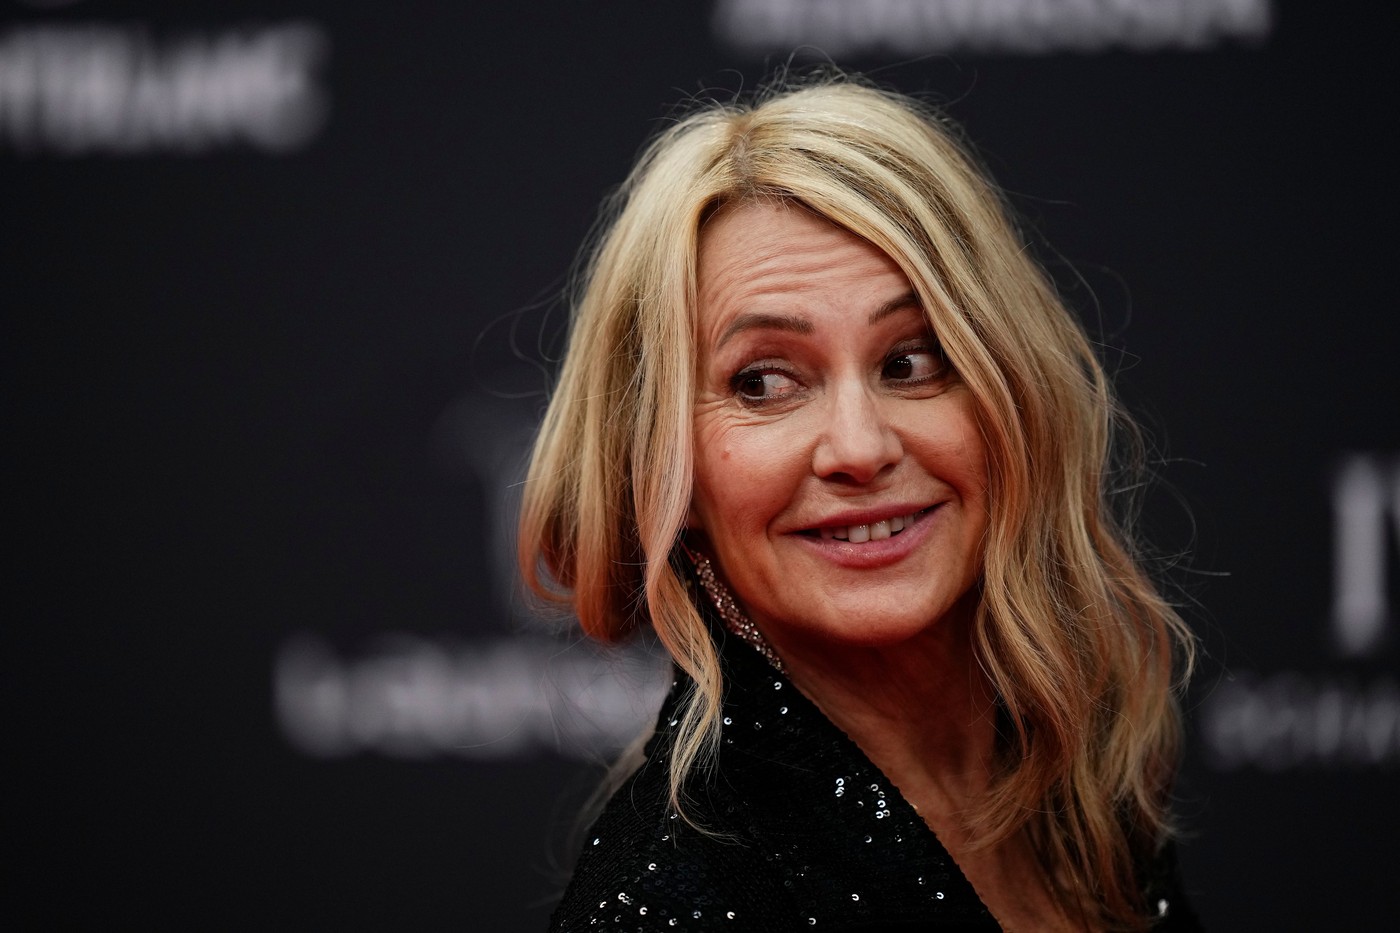 Nadia Comaneci during the red carpet prior Laureus World Sports Awards 2024 at Palacio De Cibeles on April 22, 2024 in Madrid, Spain.
2024 Laureus World Sport Awards Madrid, Spain - 22 Apr 2024,Image: 867041165, License: Rights-managed, Restrictions: RESTRICTED TO EDITORIAL USE, Model Release: no